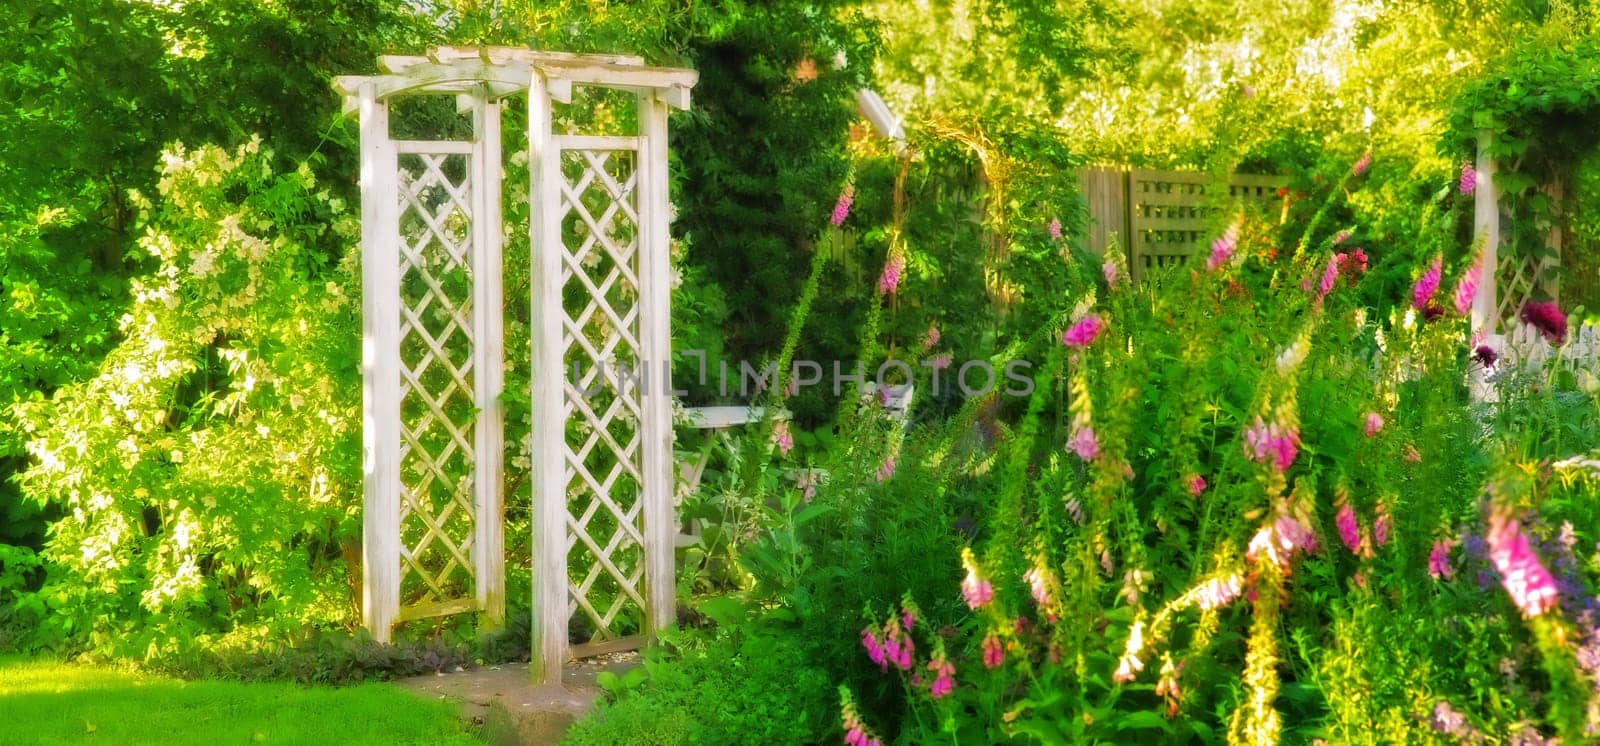 Flower, garden and arch with natural greenery in nature for venue, floral blossoms or outdoor bloom. Plants, wooden structure or empty backyard with growth, wooden frame or design for exterior decor.